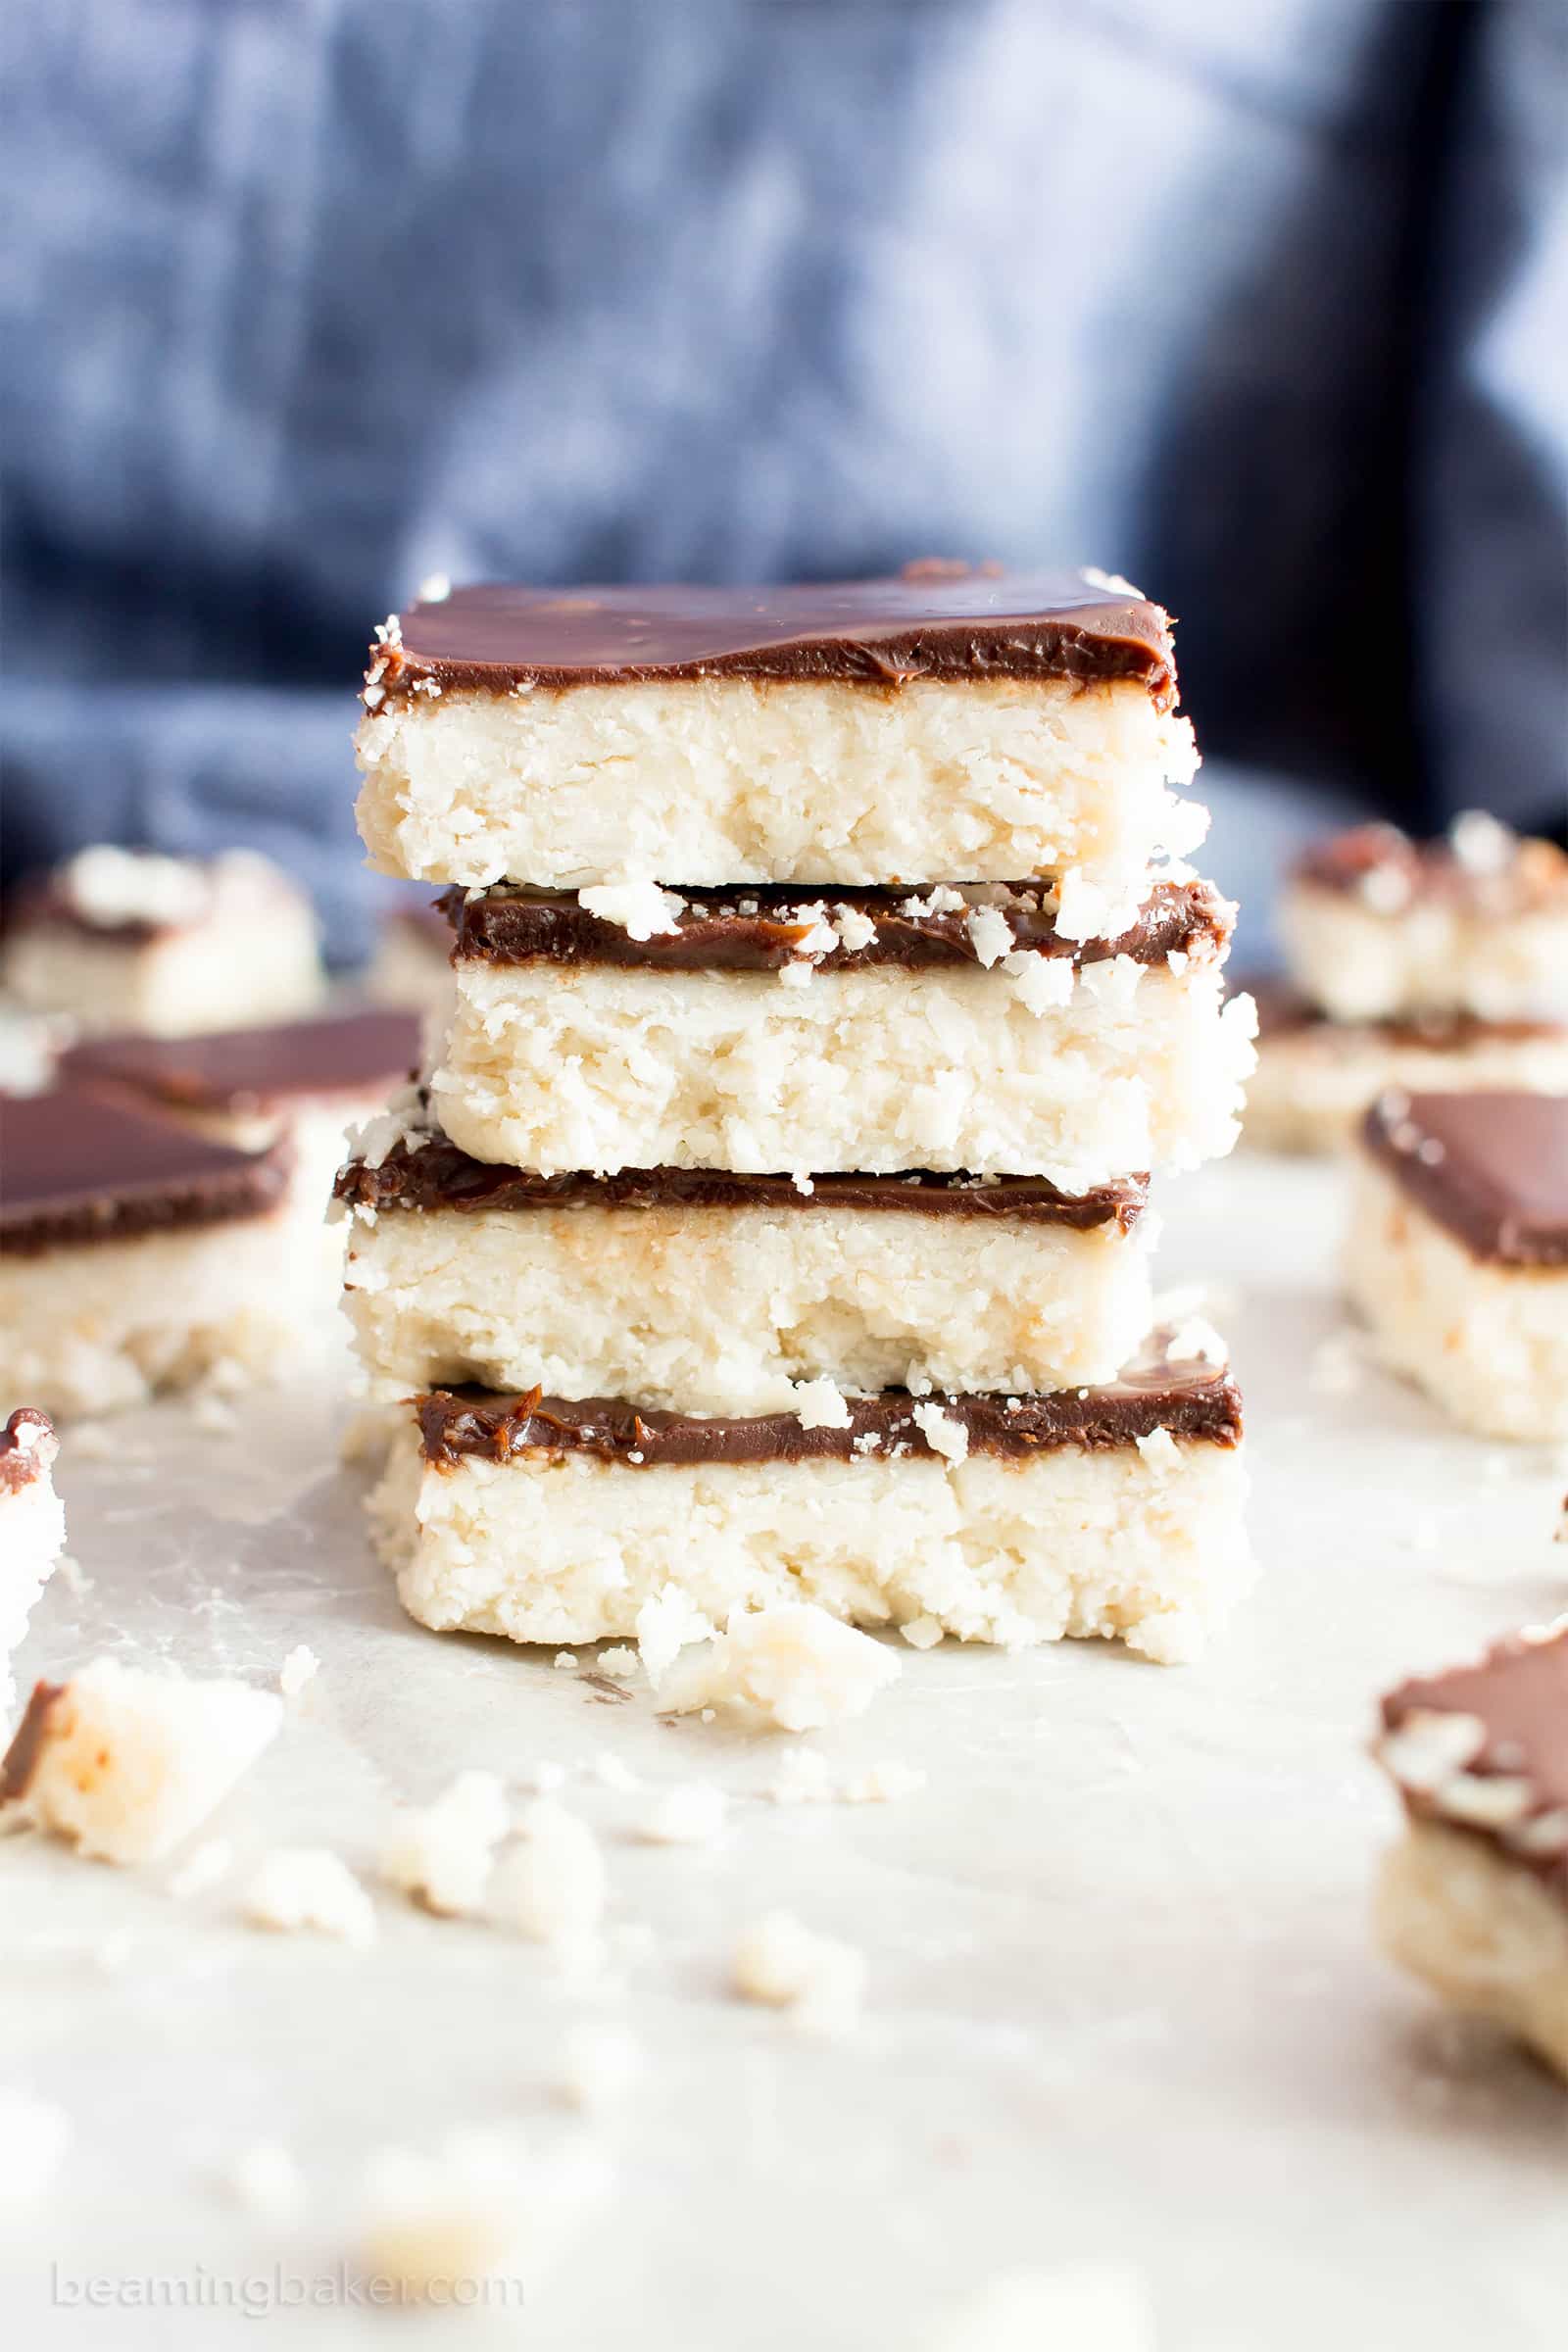 Vegan Coconut Chocolate Bars: this 5 ingredient coconut bars recipe yields thick, indulgent coconut bars enrobed in a velvety layer of rich chocolate. Healthy, Paleo, No Bake, Gluten Free. #Coconut #Bars #Vegan #Chocolate | Recipe at BeamingBaker.com